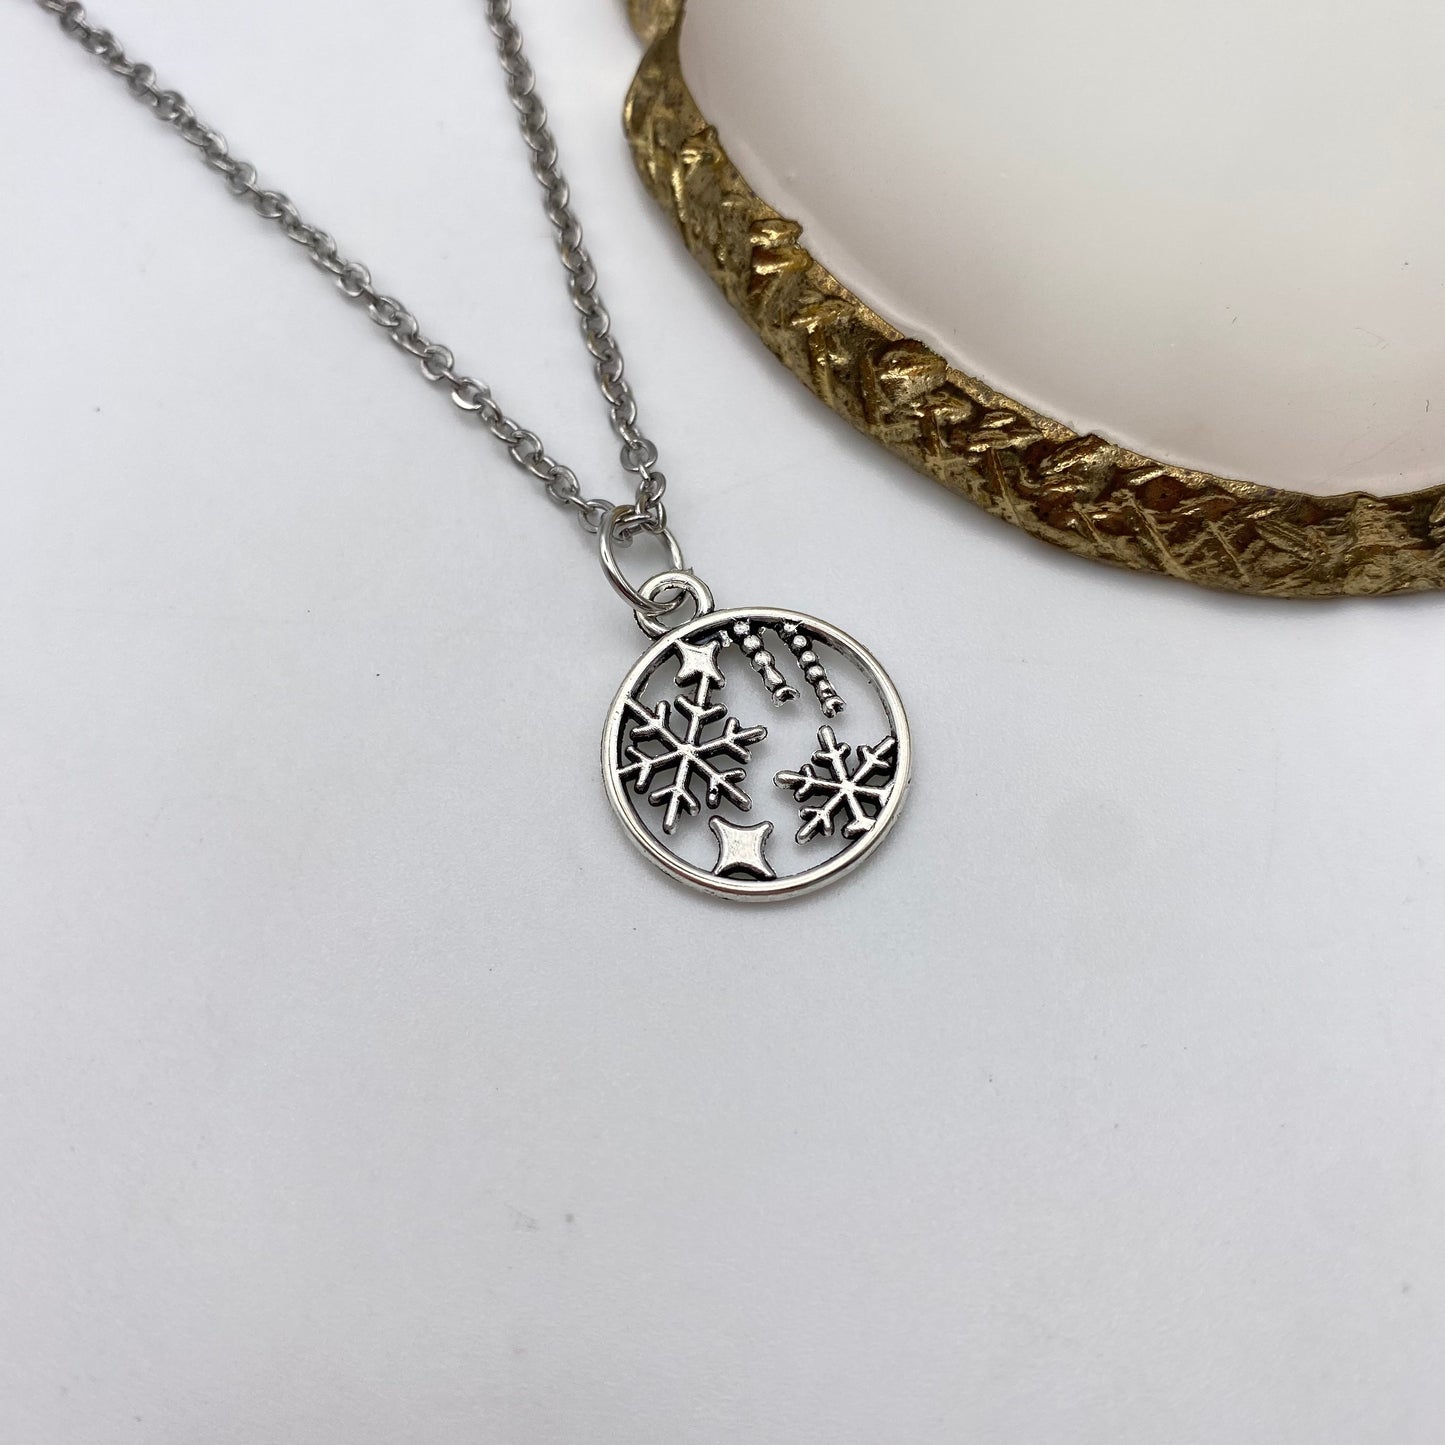 Snowflake Bauble Necklace